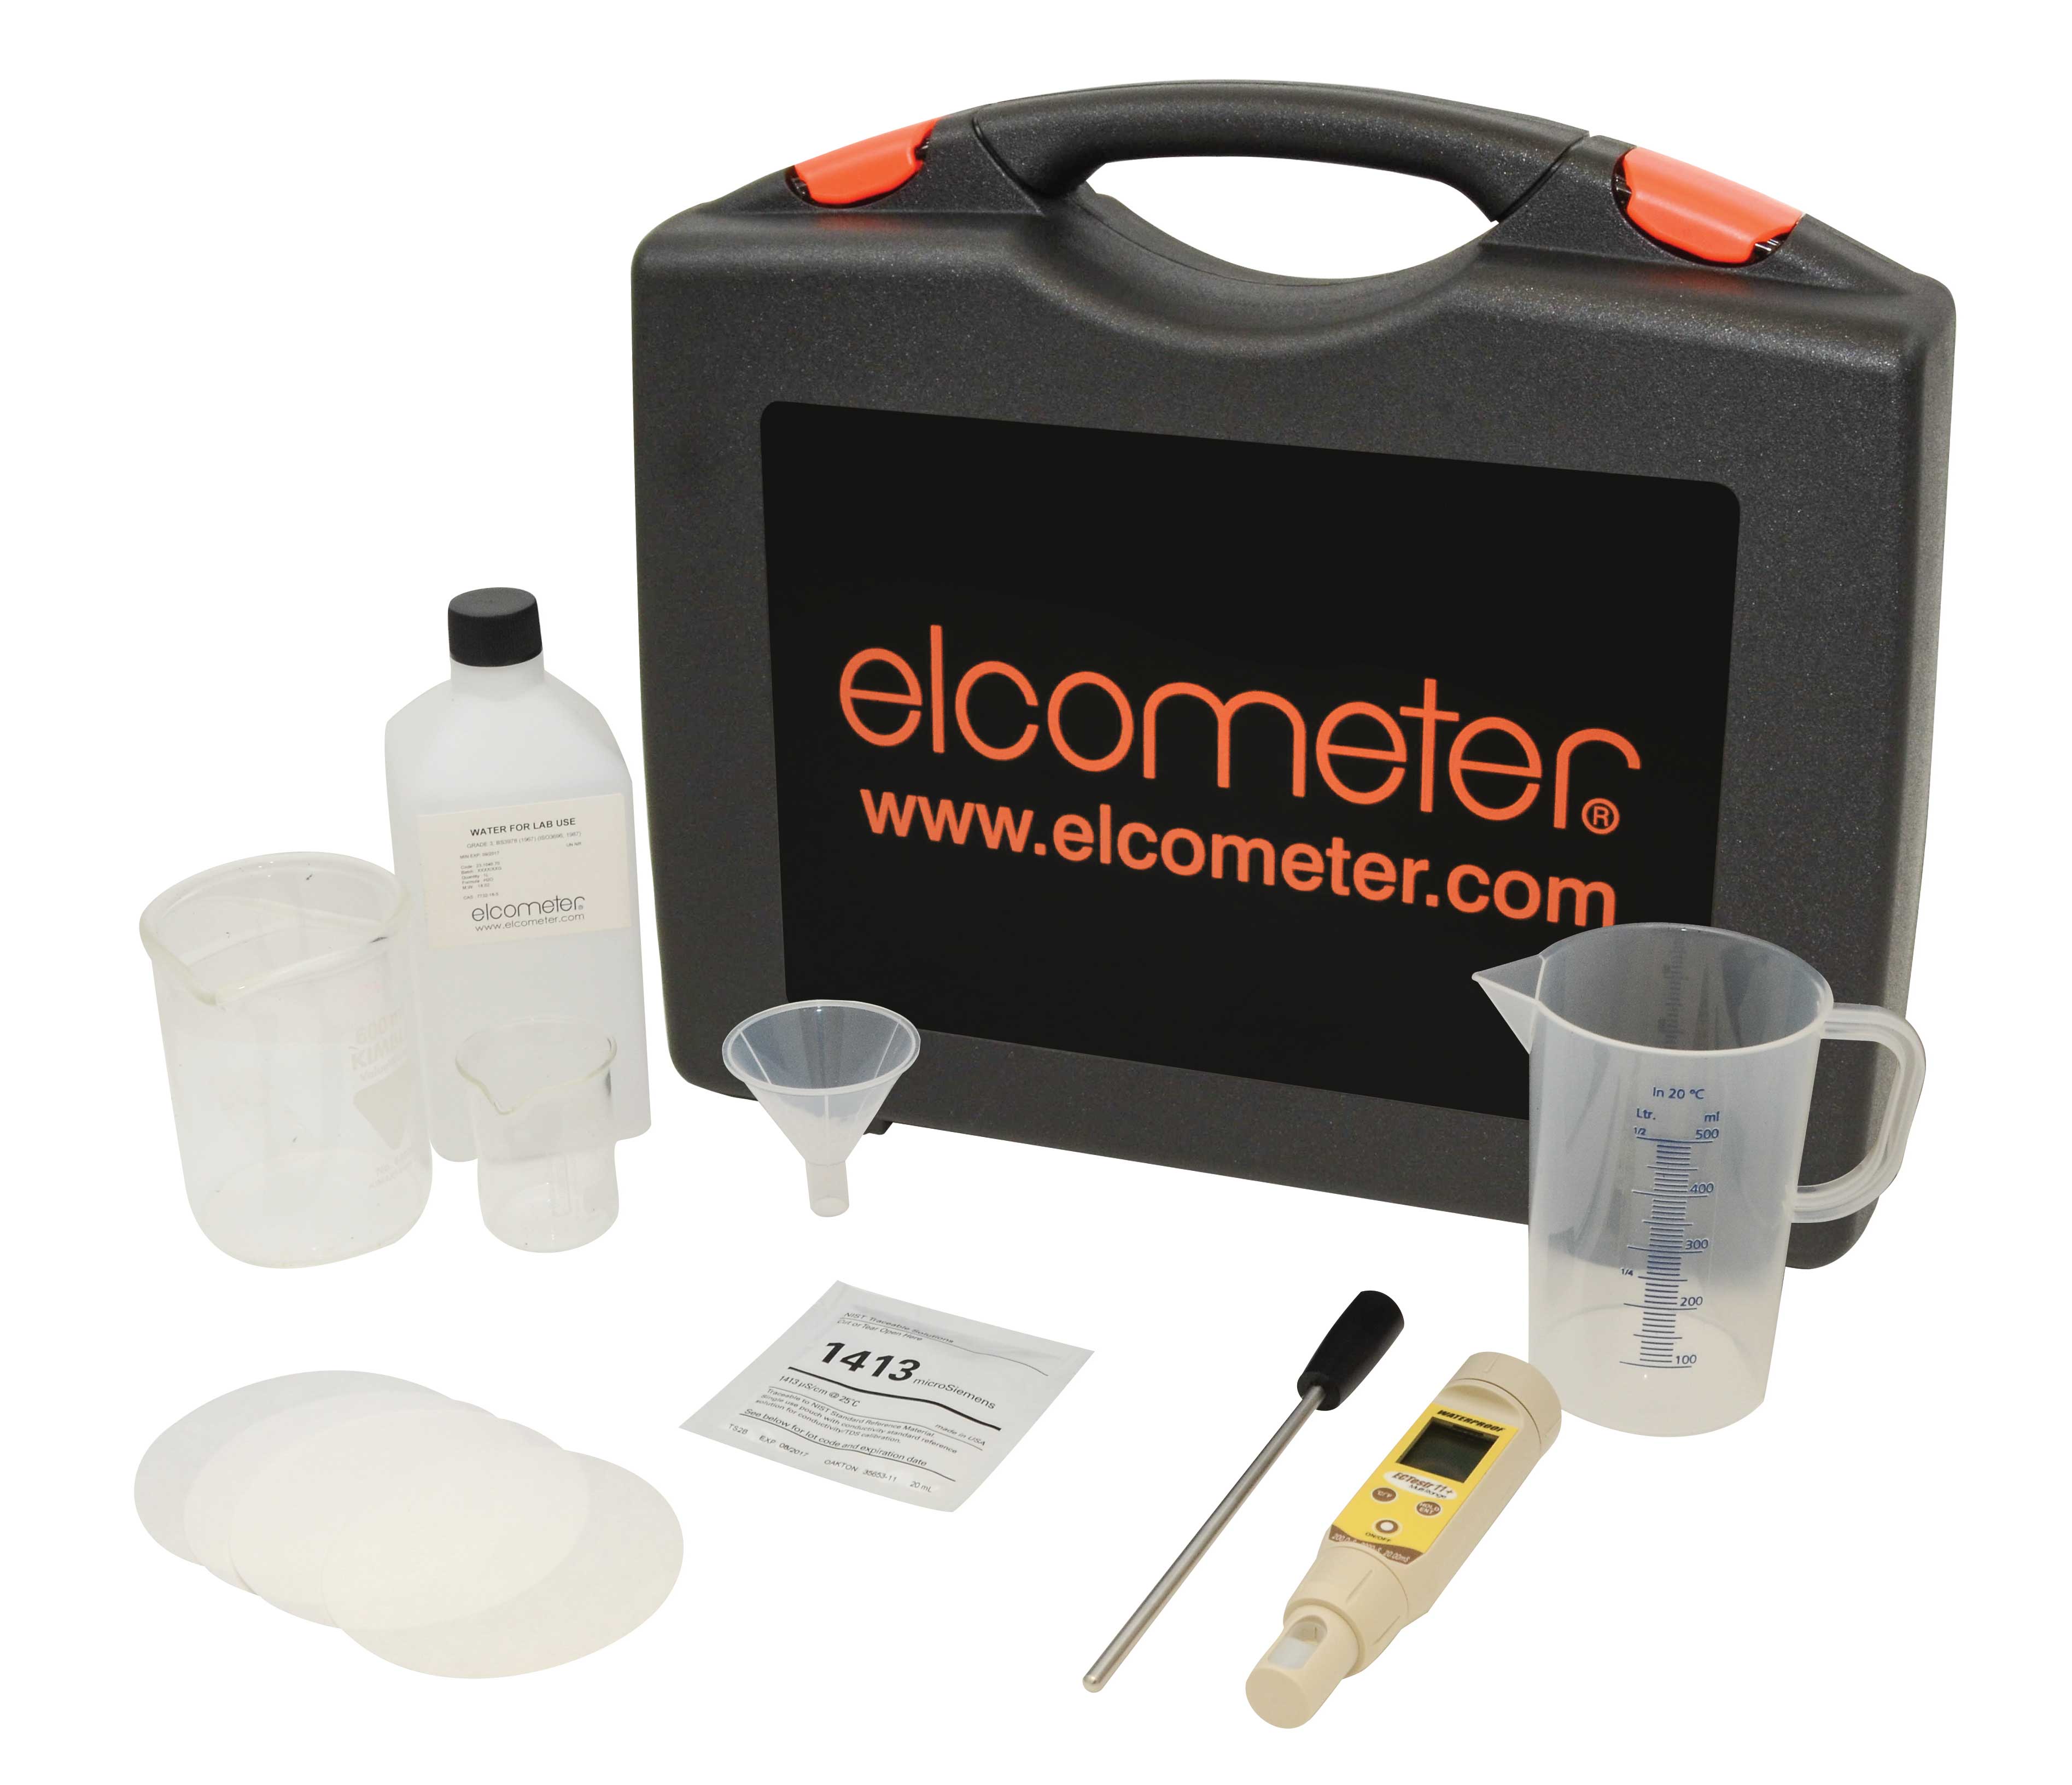 Black, hard plastic handle case with a label which orange letters read 'elcometer wwww.elcometer.com'. In front of the closed kit, there are two clear, plastic jugs, a funnel, a clear bottle of liquid, a thin metal probe, an electronic reader and a small white sachet.